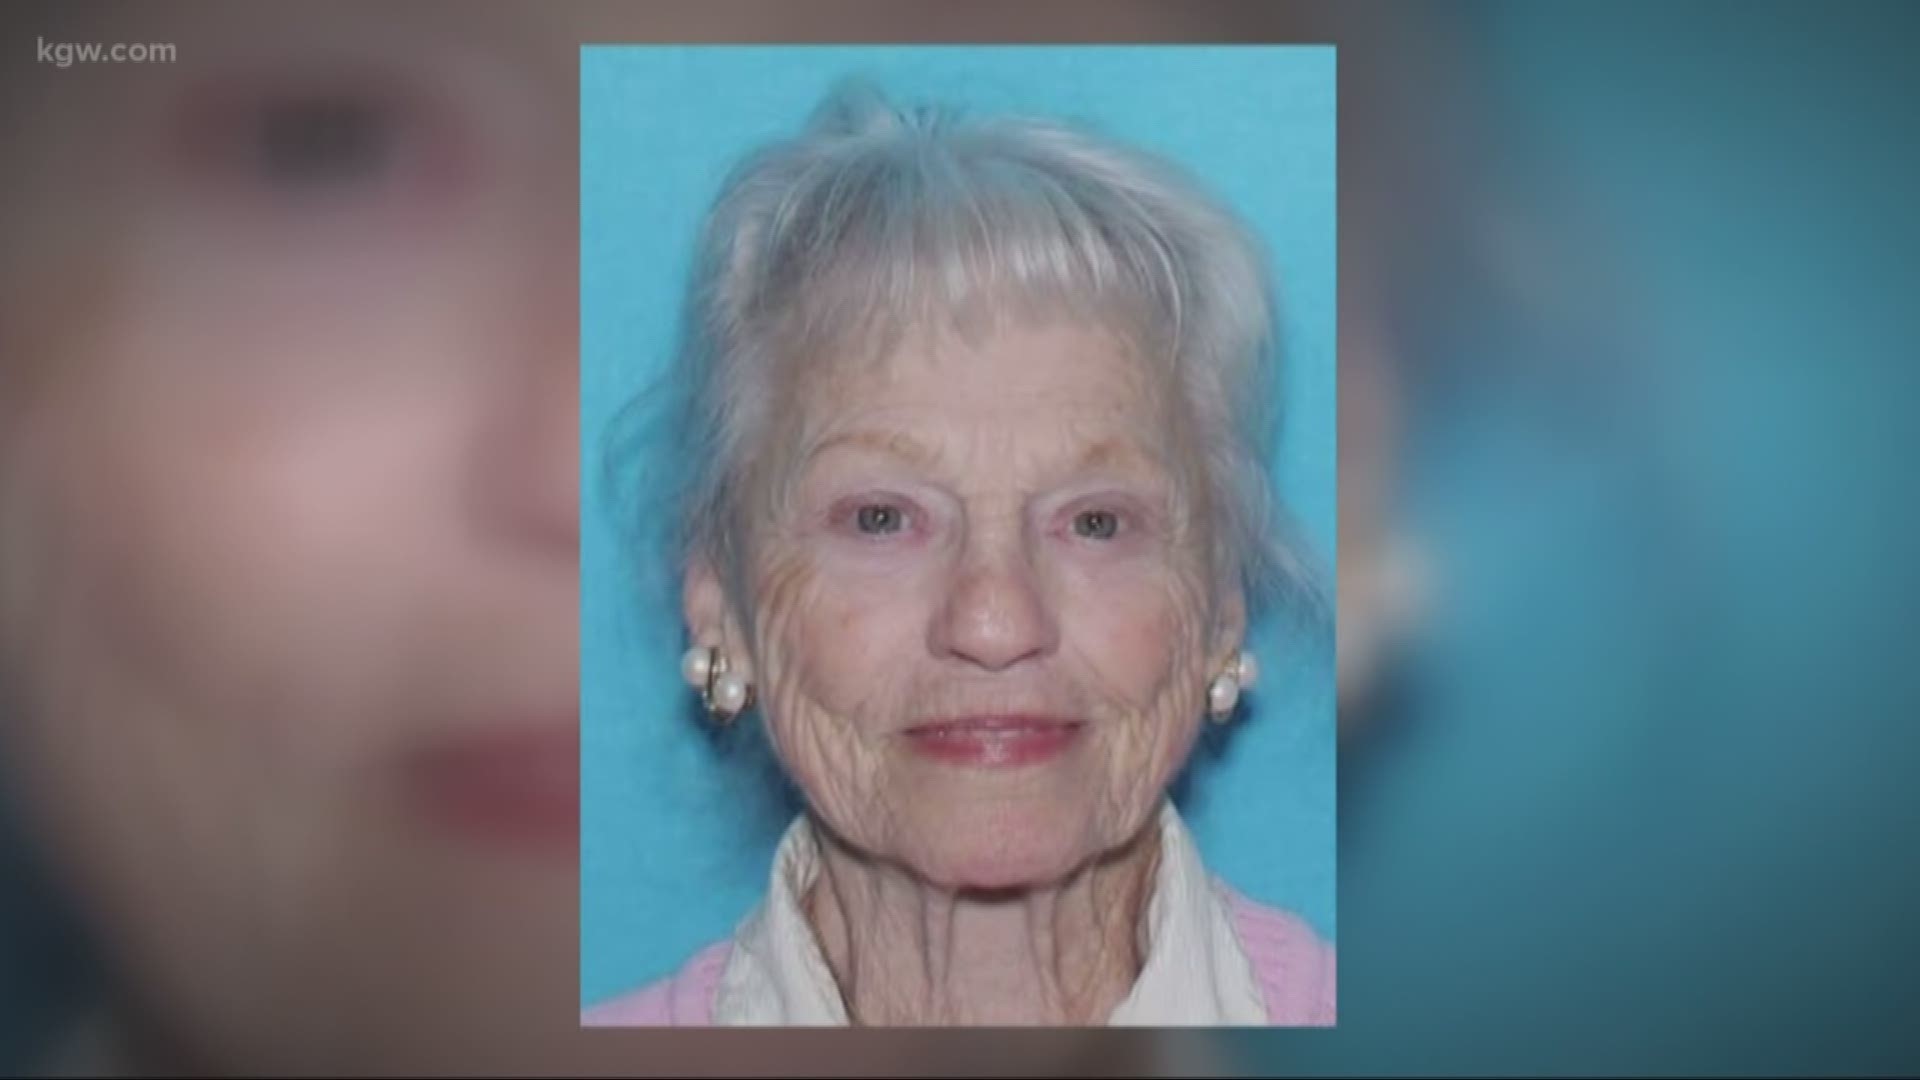 Portland police say a woman's body found in car in Southeast Portland is likely that of a missing 89-year-old